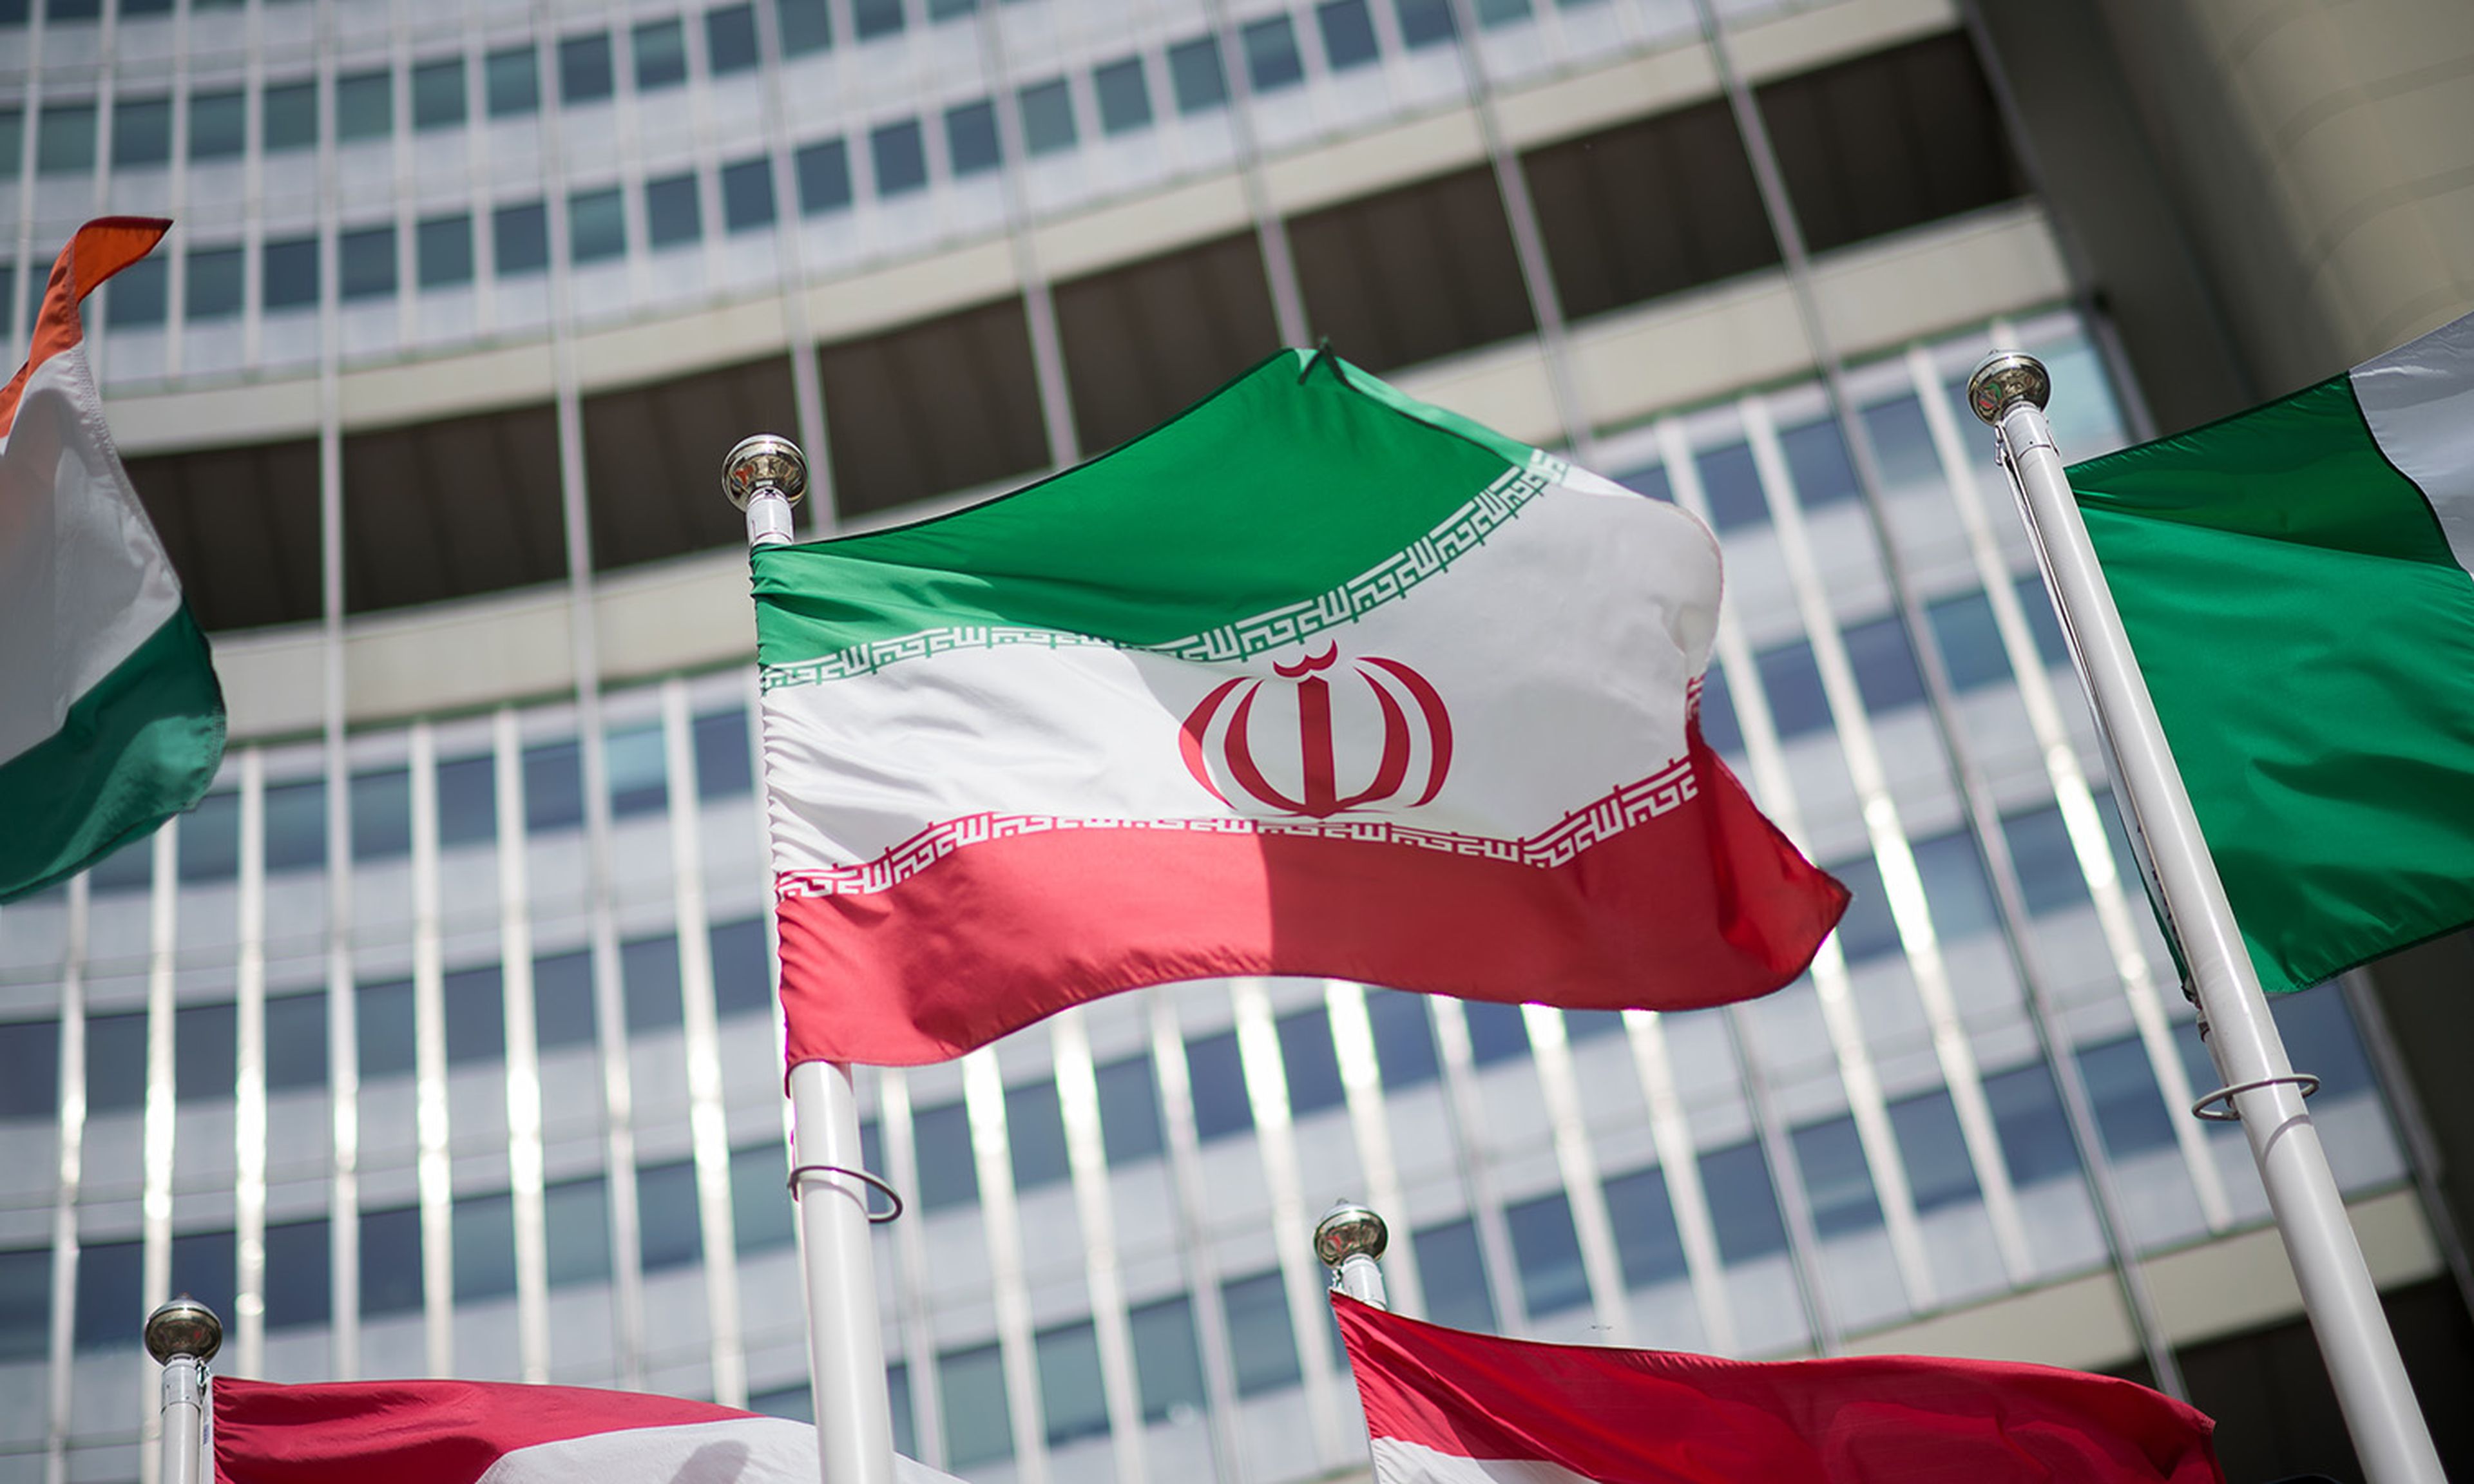 The Iranian flag is seen in front of the building of the International Atomic Energy Agency (IAEA) Headquarters on May 24, 2021, in Vienna, Austria. (Photo by Michael Gruber/Getty Images)